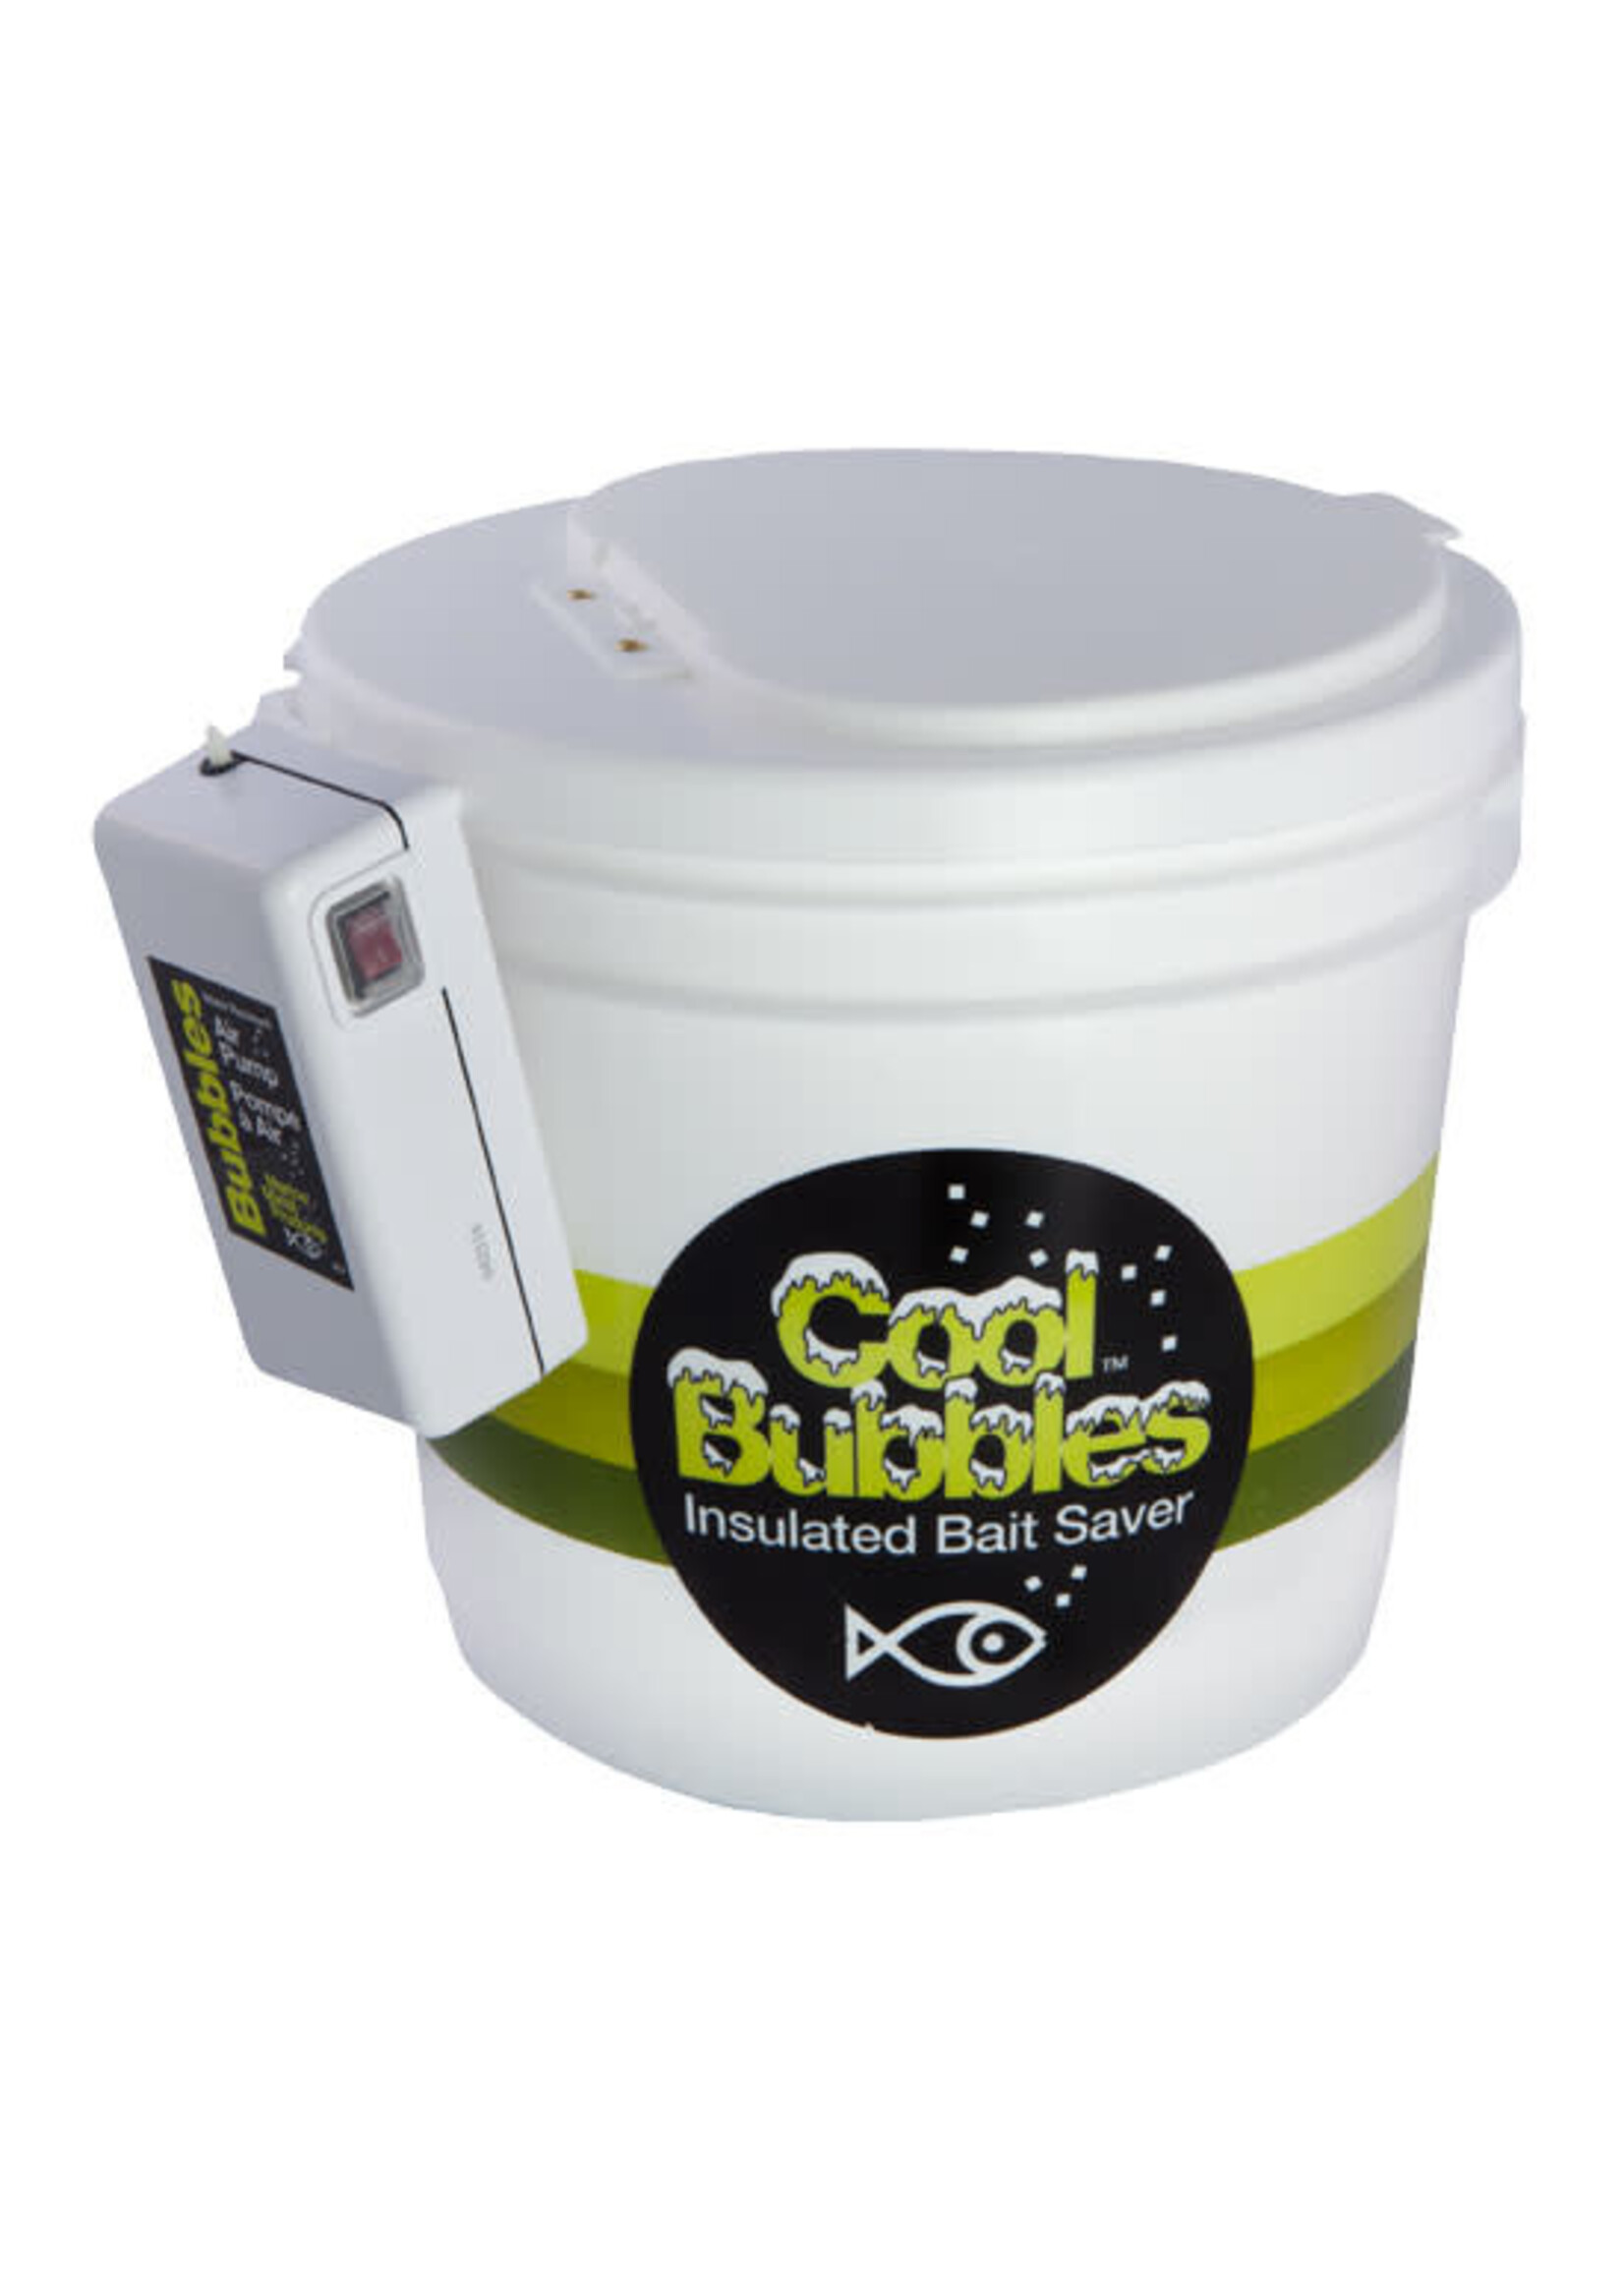 Marine Metal Marine Metal Products Cool Bubbles Insulated/Aerated 3.5 Gallon Bait Container